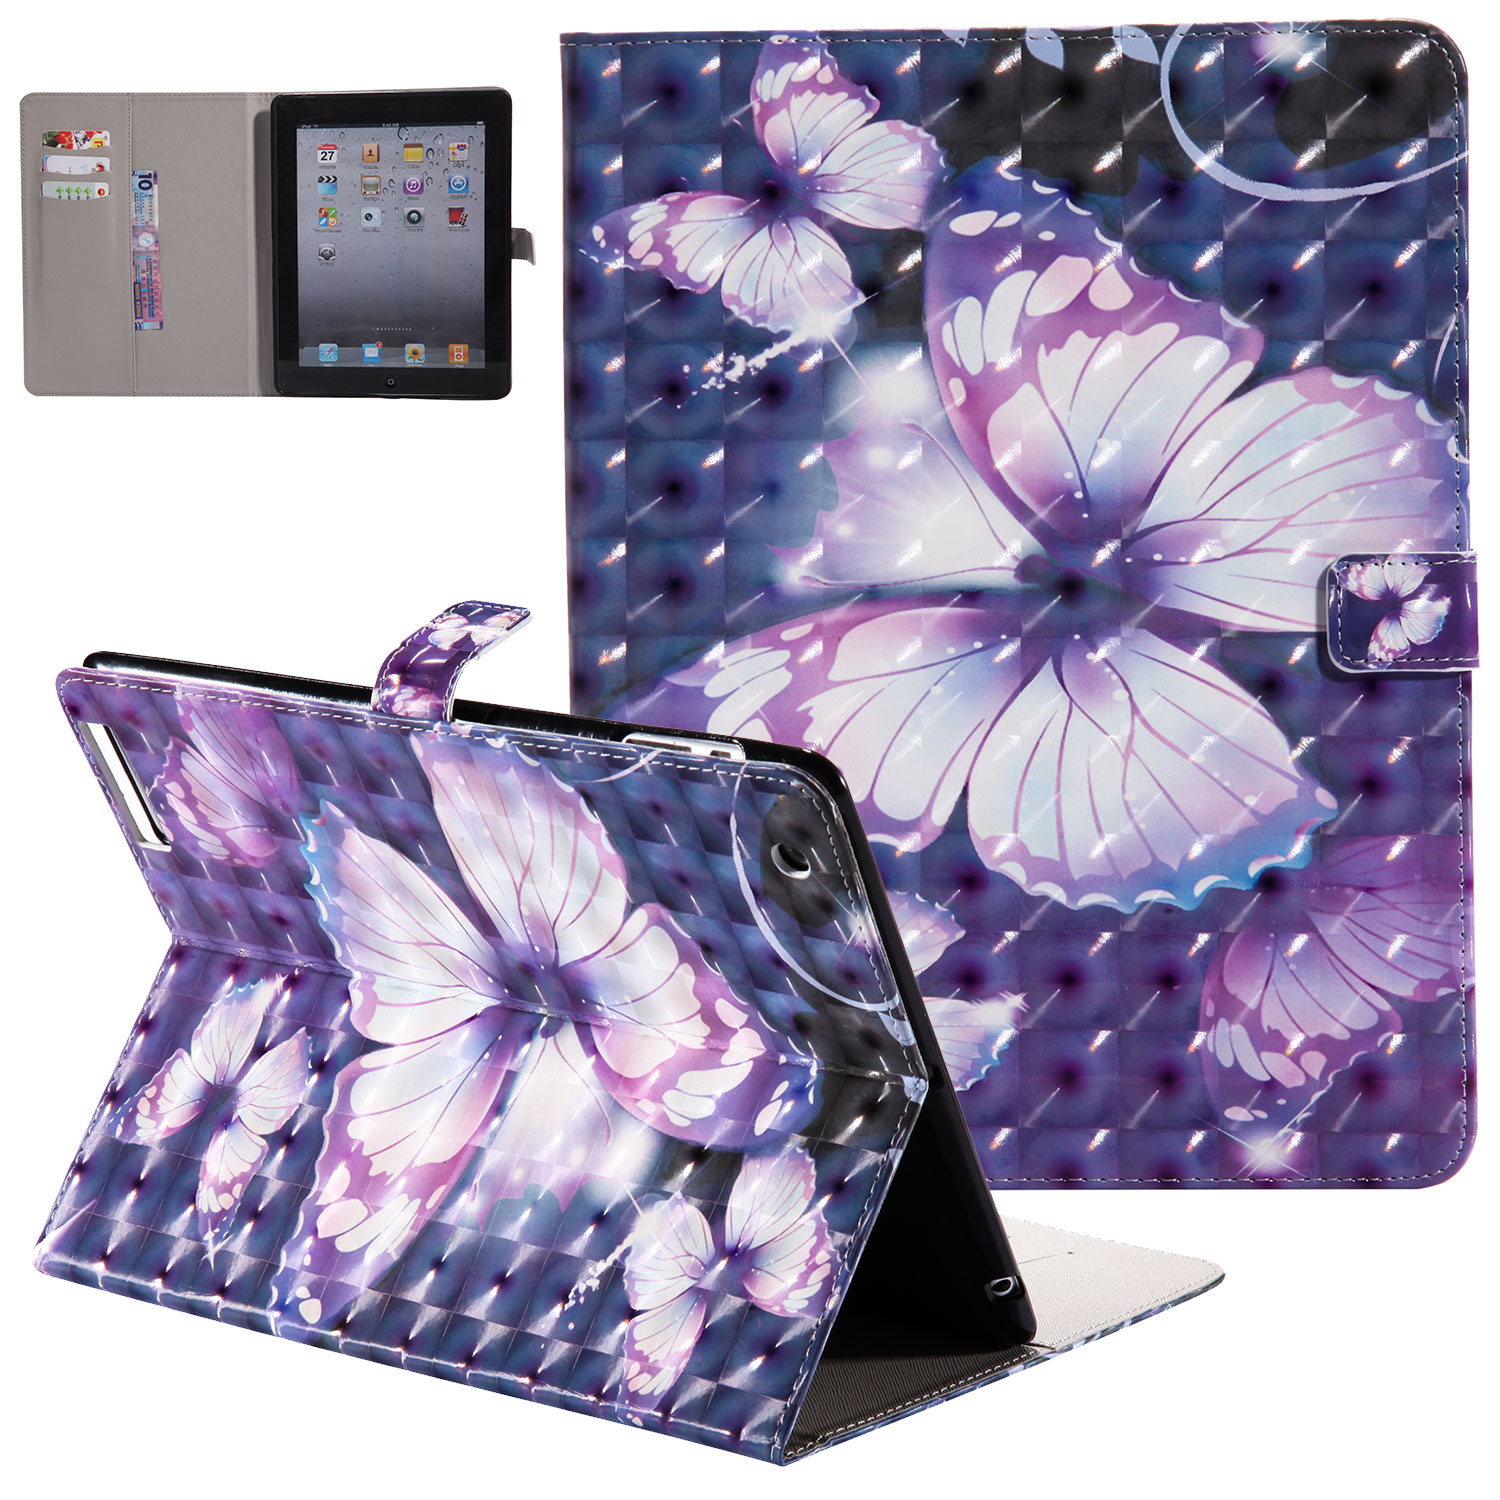 iPad 4 Case, iPad 3 Case, iPad 2 Case, Allytech 3D Pattern PU Leather Protective Smart Case with Auto Sleep Wake Folio Kickstand Cards Slots Wallet Case Cover for Apple iPad 2 3 4, Purple Butterfly - image 1 of 1